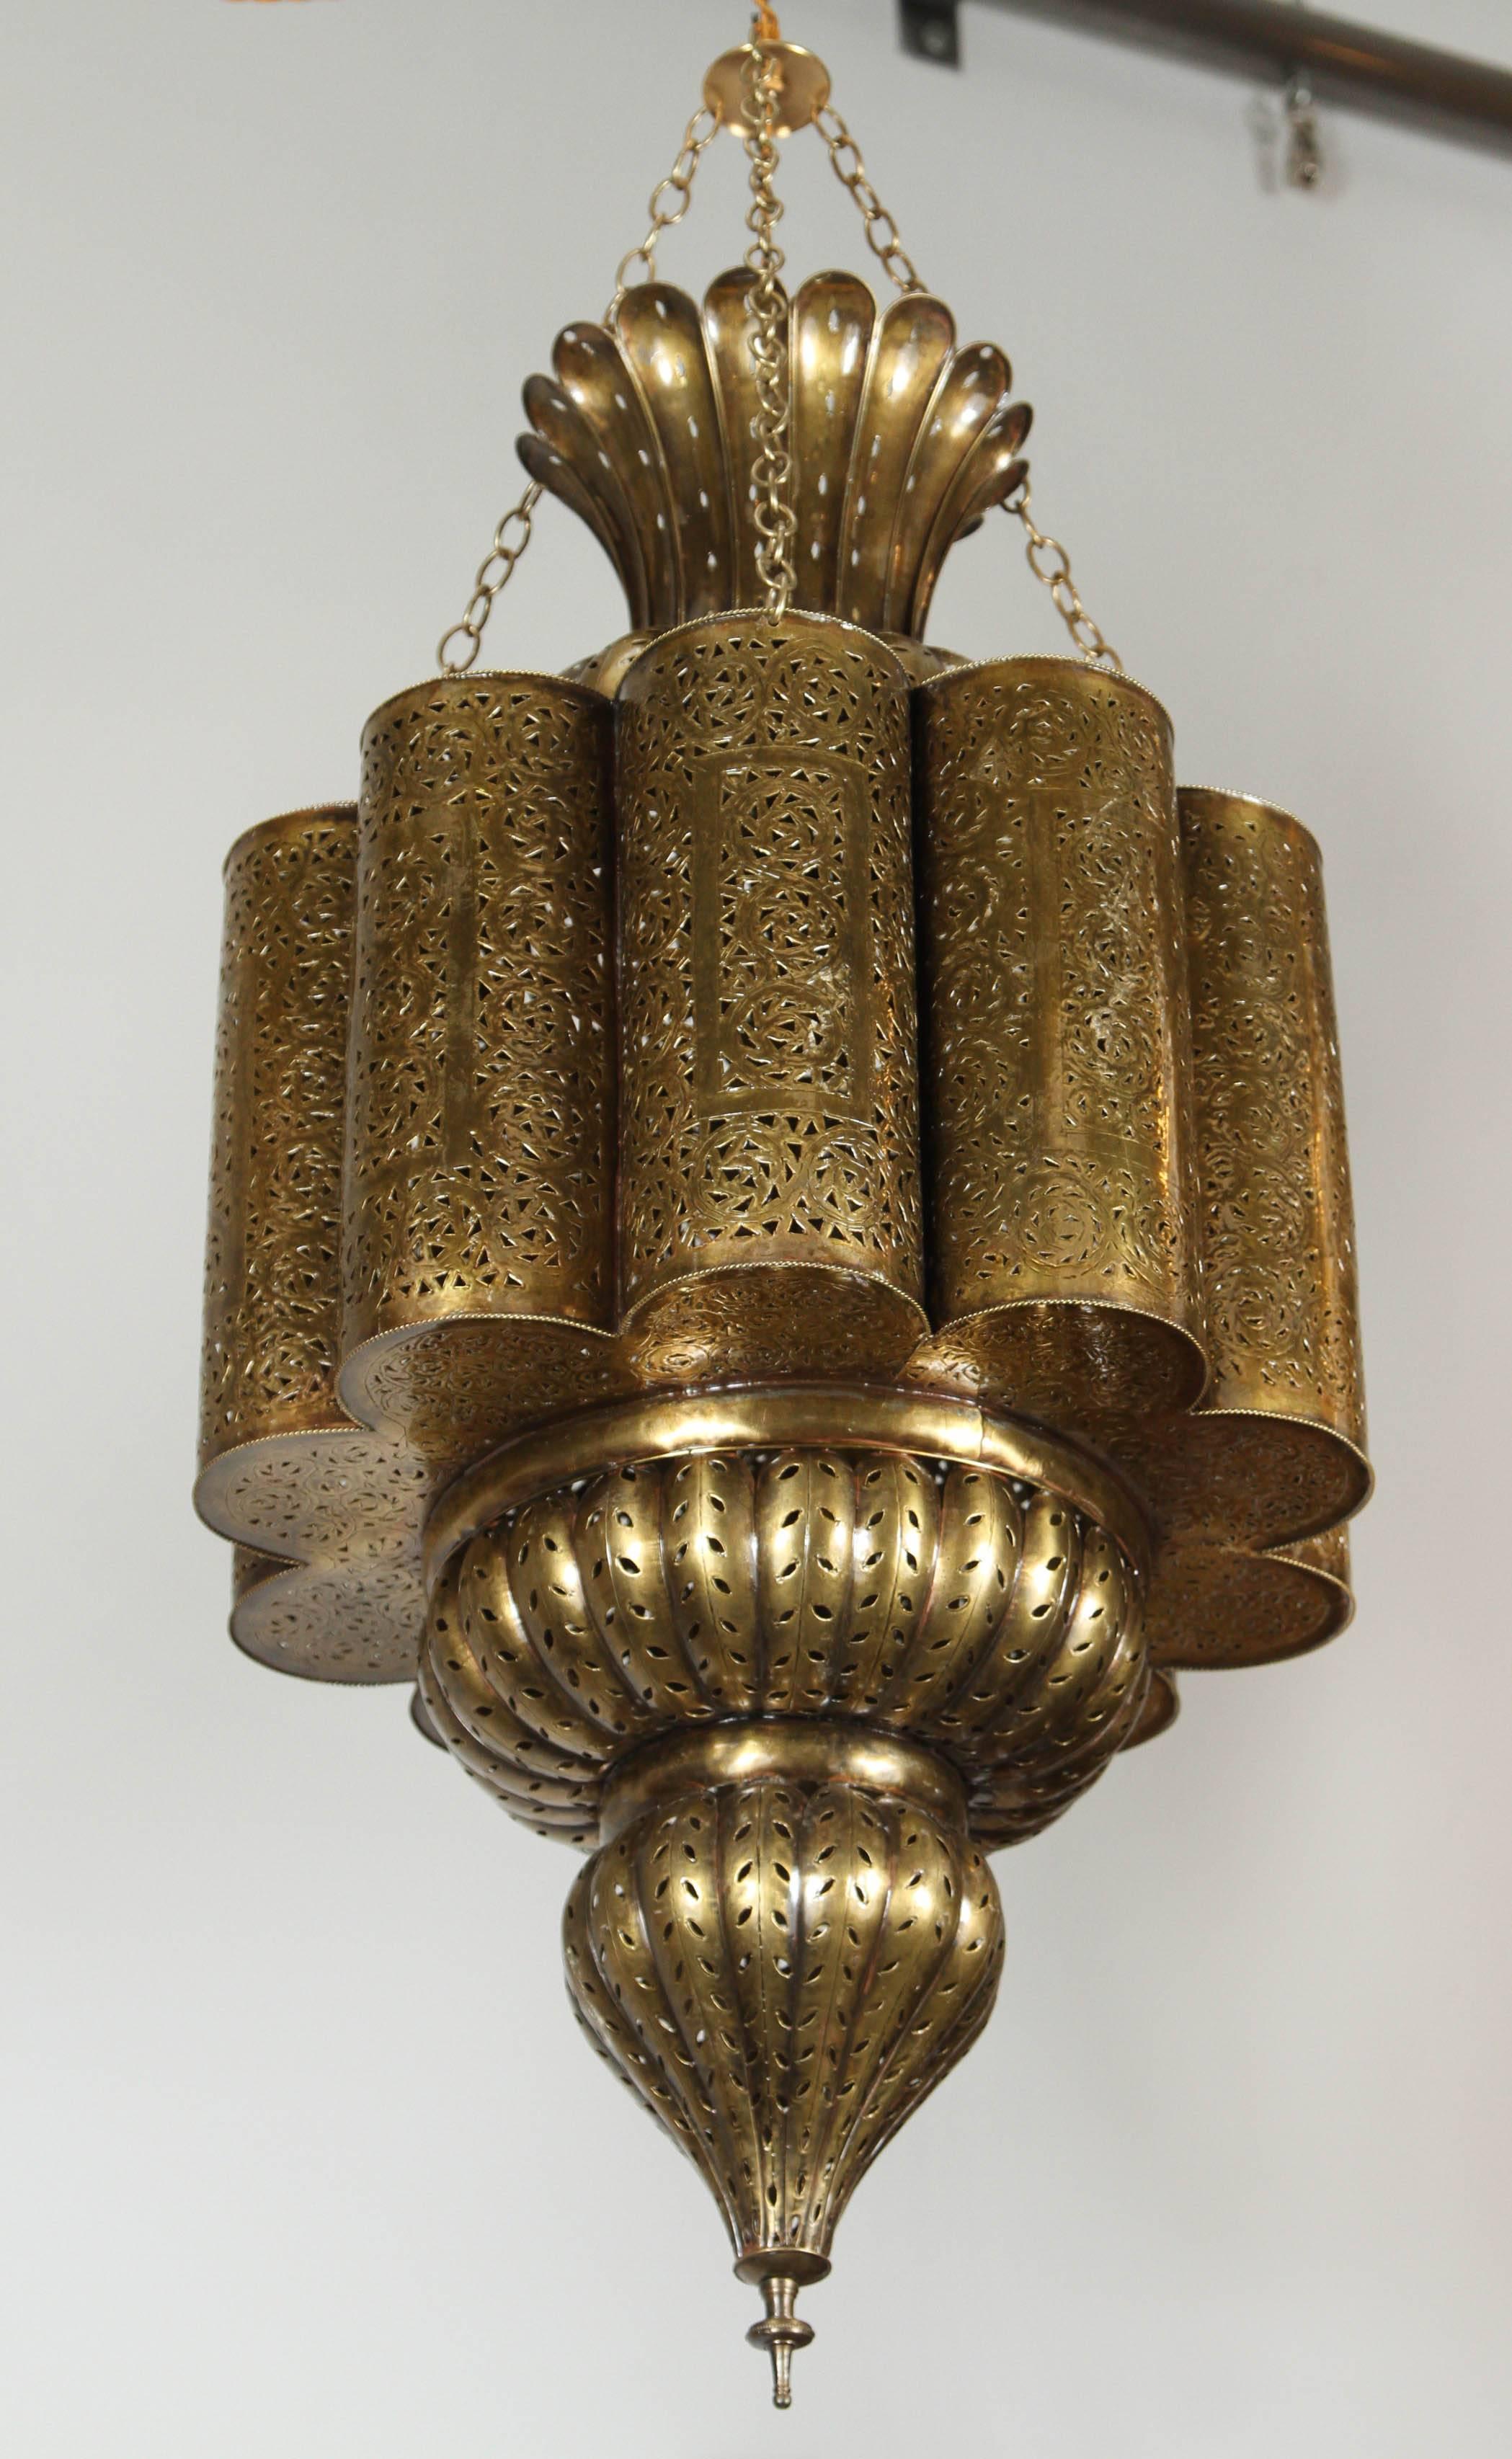 Spectacular, exquisite pierced brass Moorish Moroccan chandelier.
 This exquisite light fixture is handcrafted and chiseled with fine filigree Islamic designs. Moroccan bronze patina finish, hand cut and hand-chased brass.
Brass body is 31